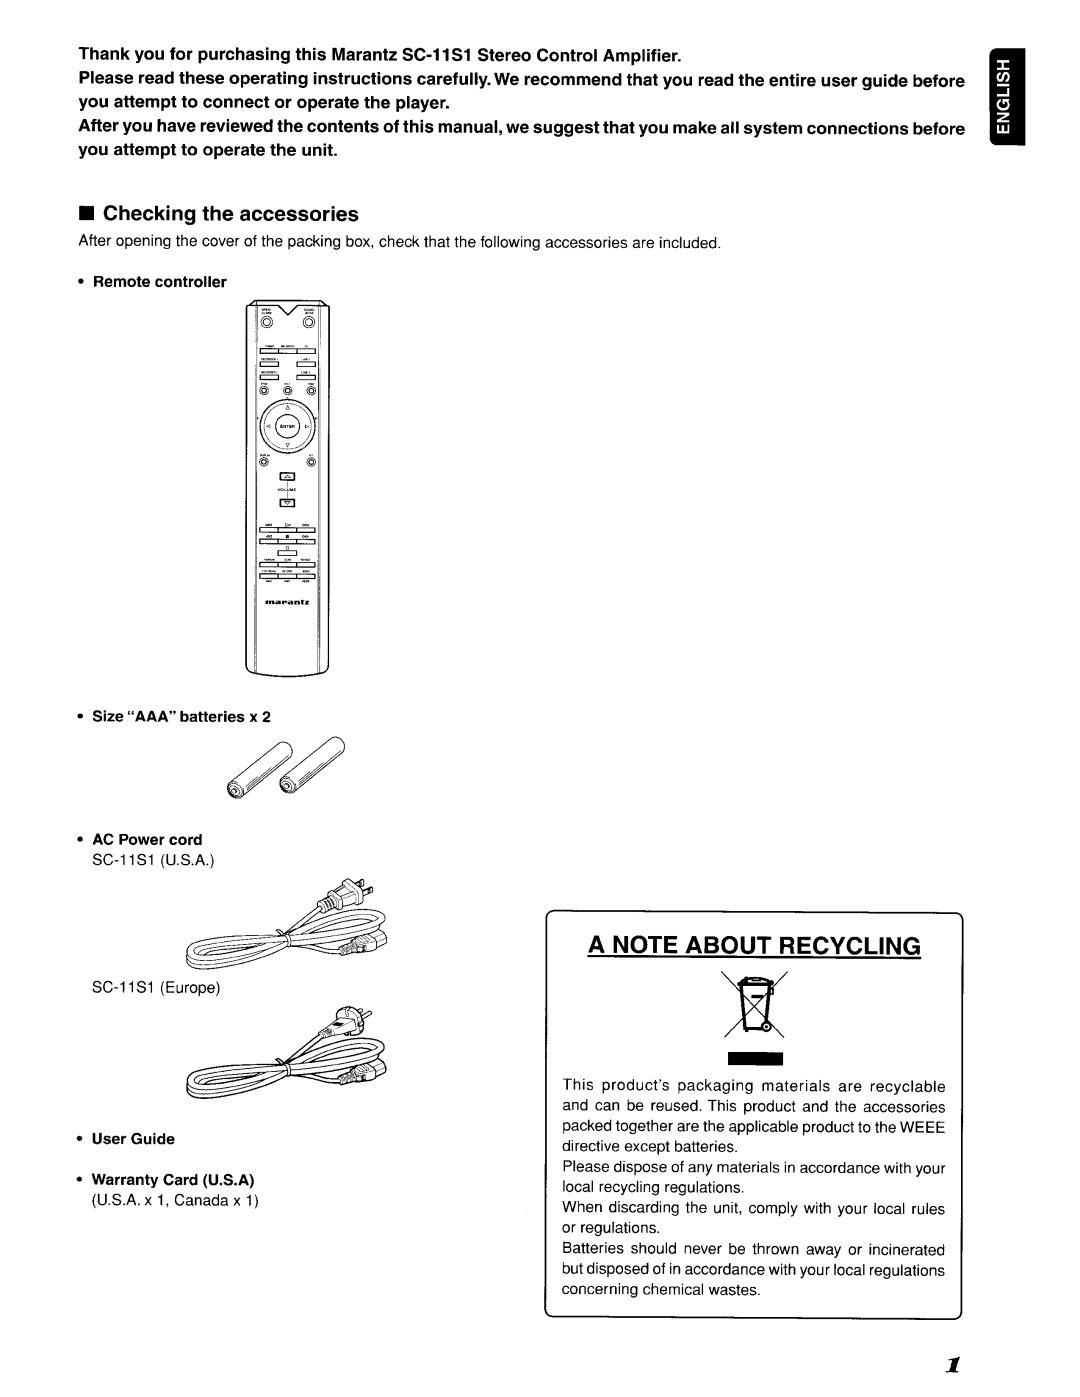 Marantz SC-11S1, 642SC11S1 manual A Note About Recycling, Checking the accessories 